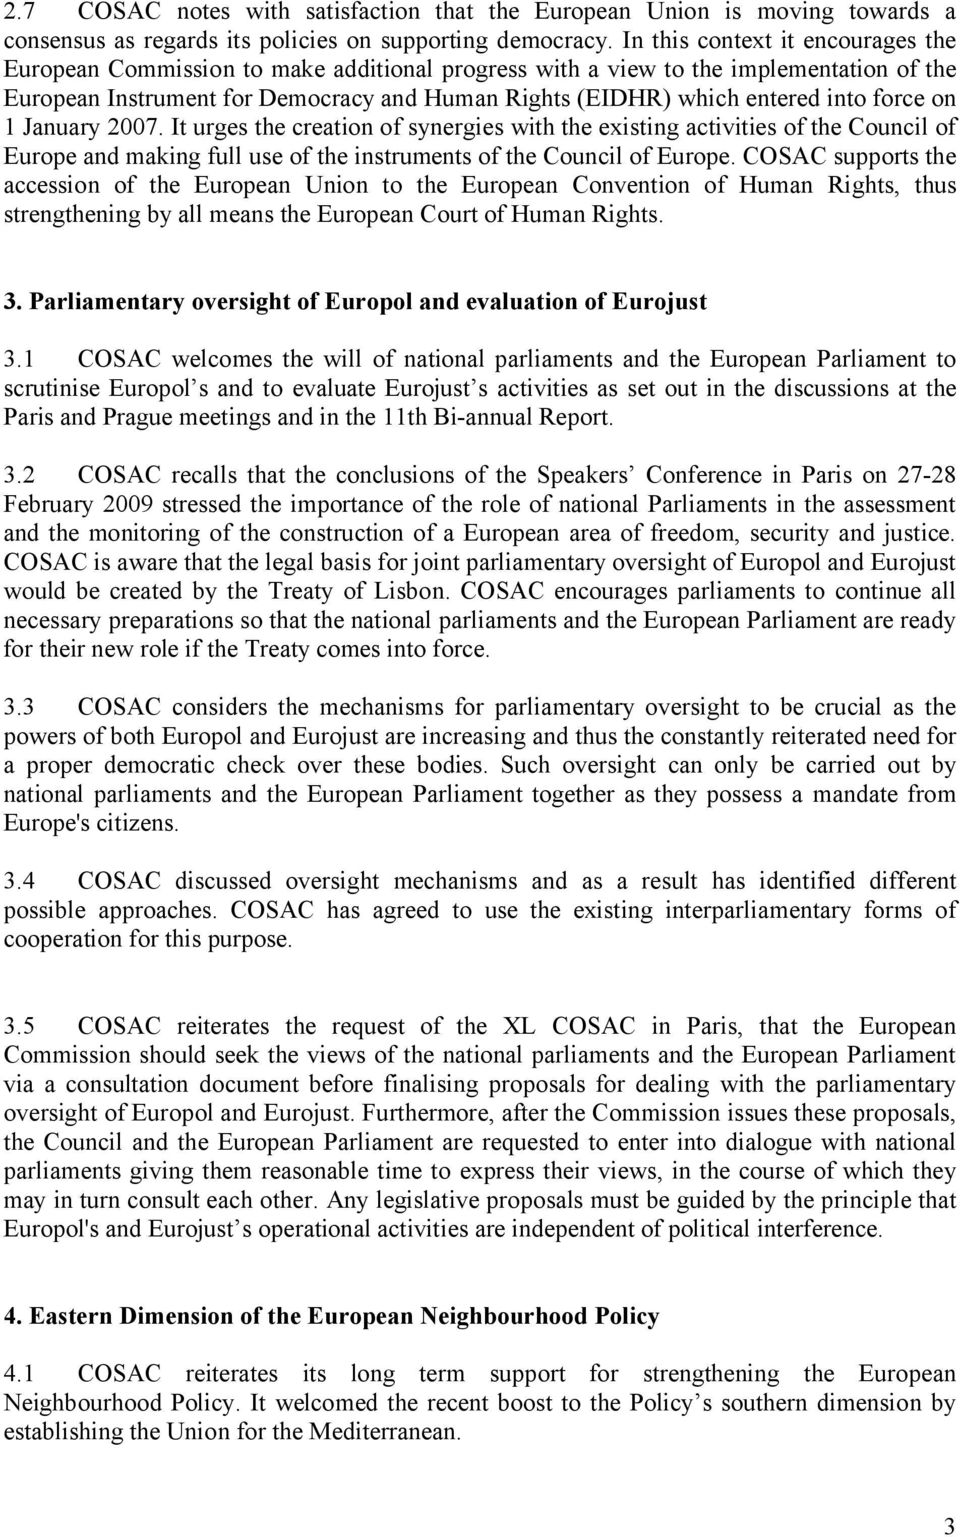 into force on 1 January 2007. It urges the creation of synergies with the existing activities of the Council of Europe and making full use of the instruments of the Council of Europe.